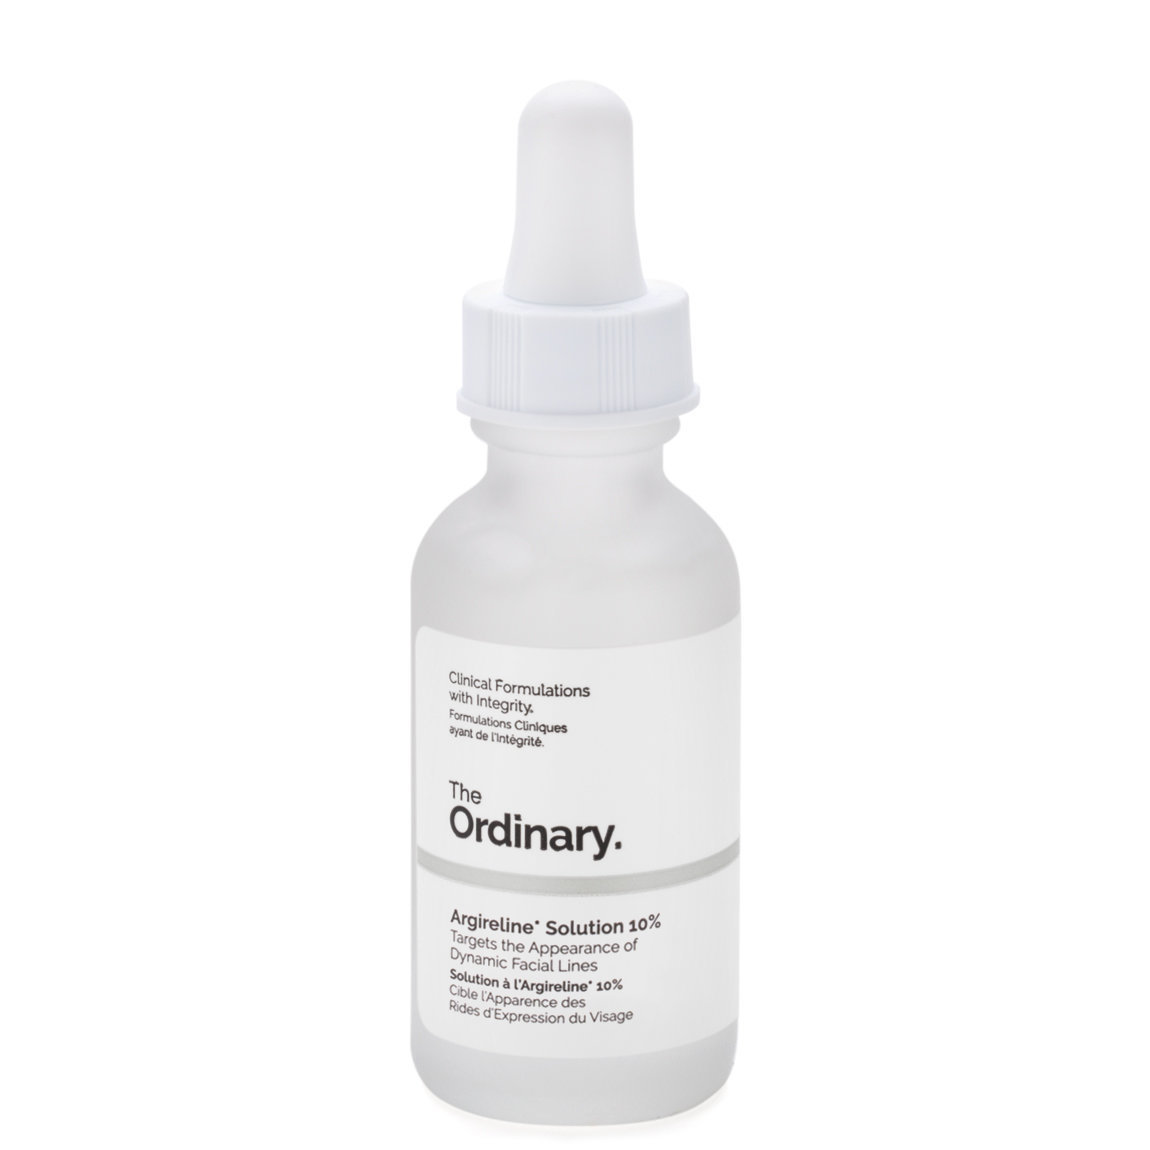 The Ordinary. Argireline Solution 10% alternative view 1 - product swatch.